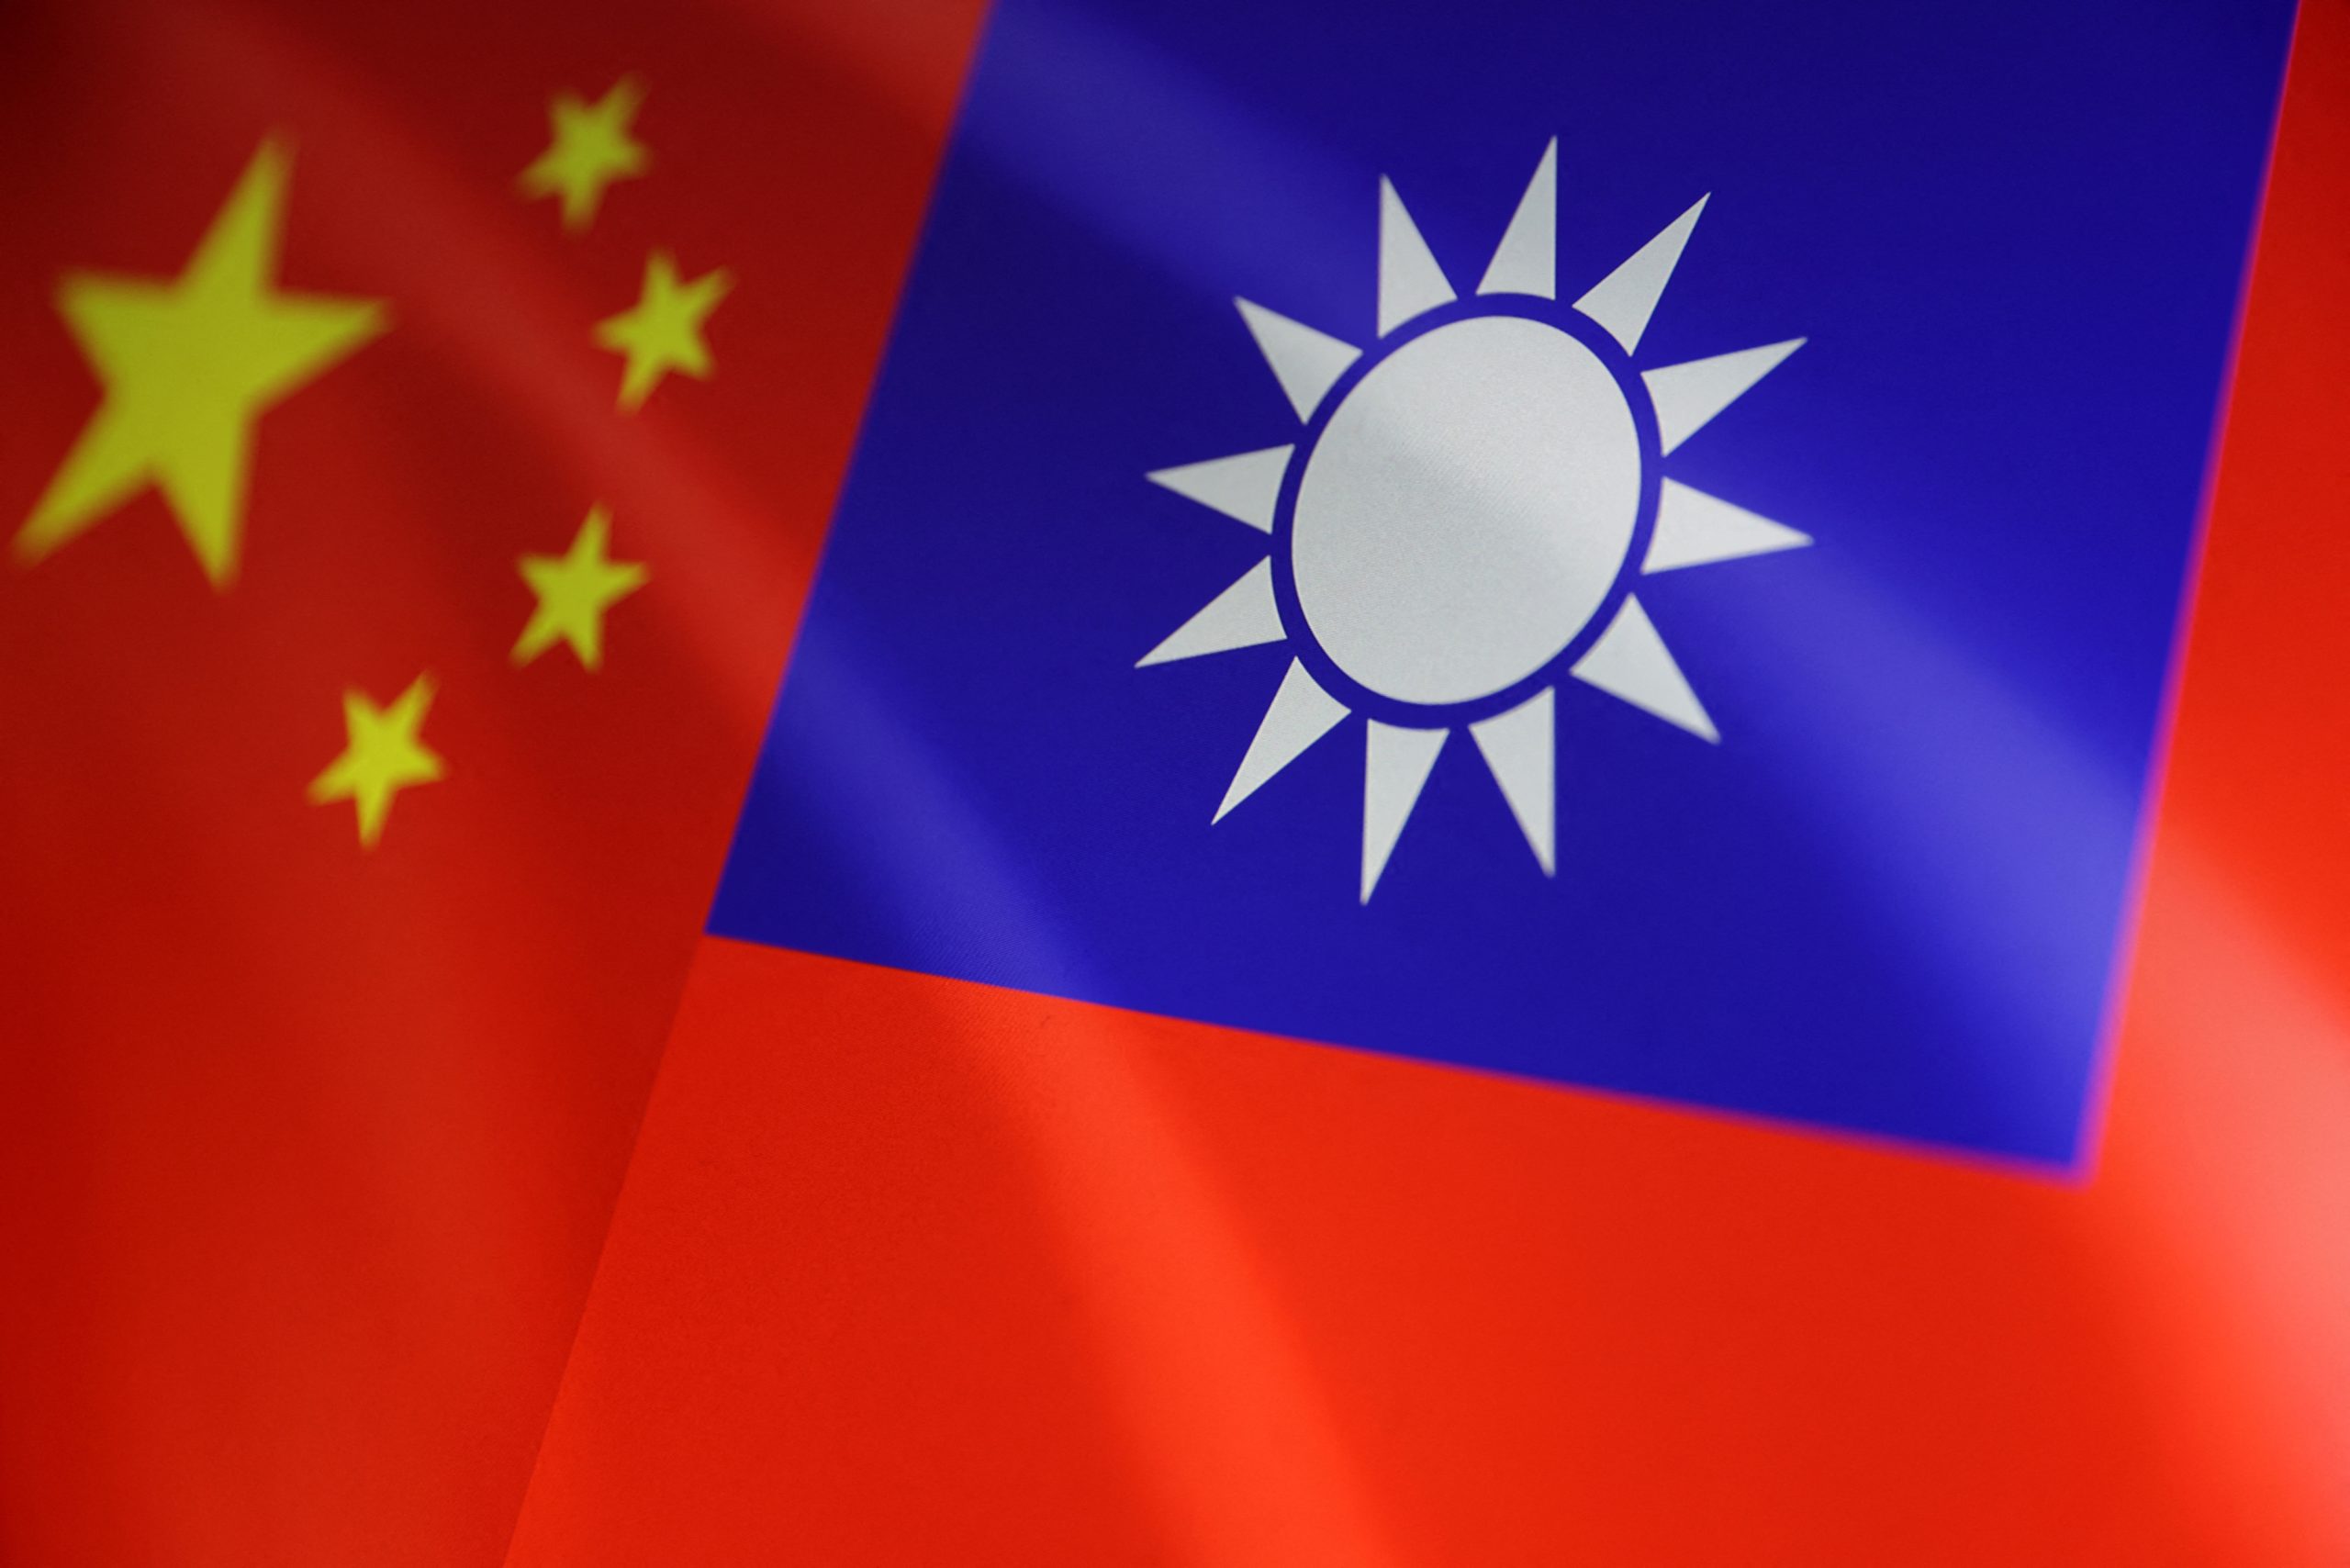 Taiwan wary of China charm offensive ahead of presidential vote – agency